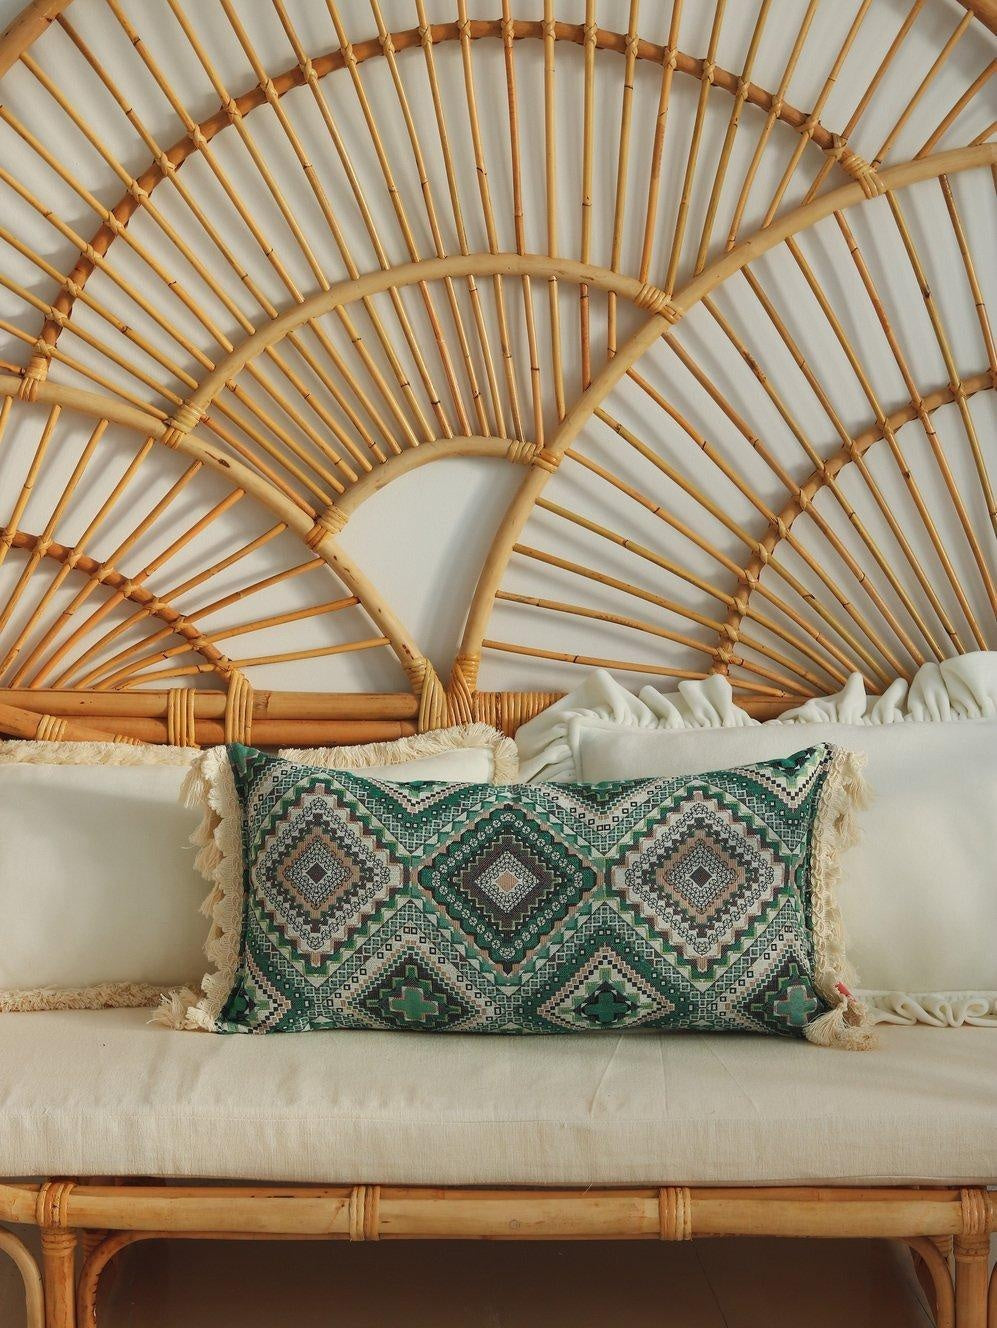 Bolster Pillow "Sea Green Mosaic" with Fringe